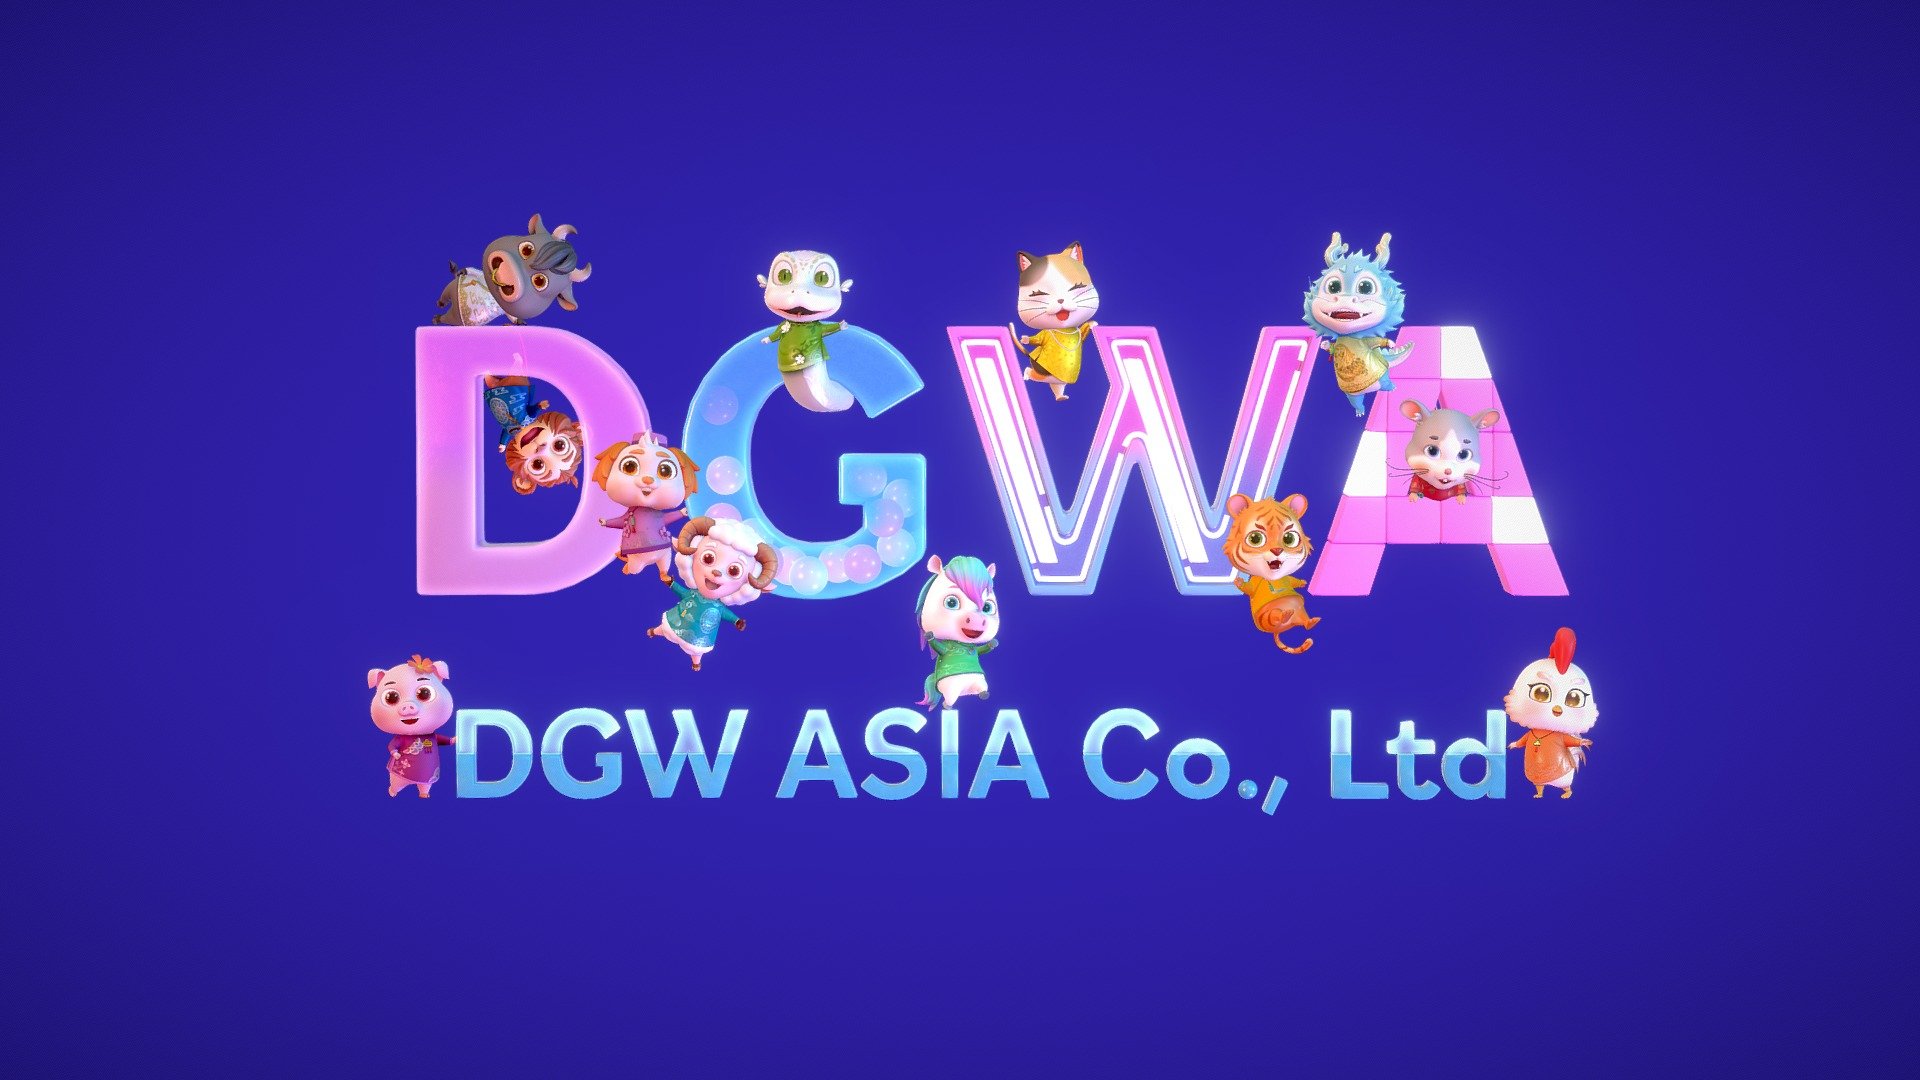 Hello! We create a fun concept for our company logo - DGWA. The concept is inspired by neon and gradient abstract style
We hope you like it. We're thrilled to create more artworks in the future. Thank you! - Welcome to DGWA - 3D model by DGW ASIA (@DGWA) 3d model